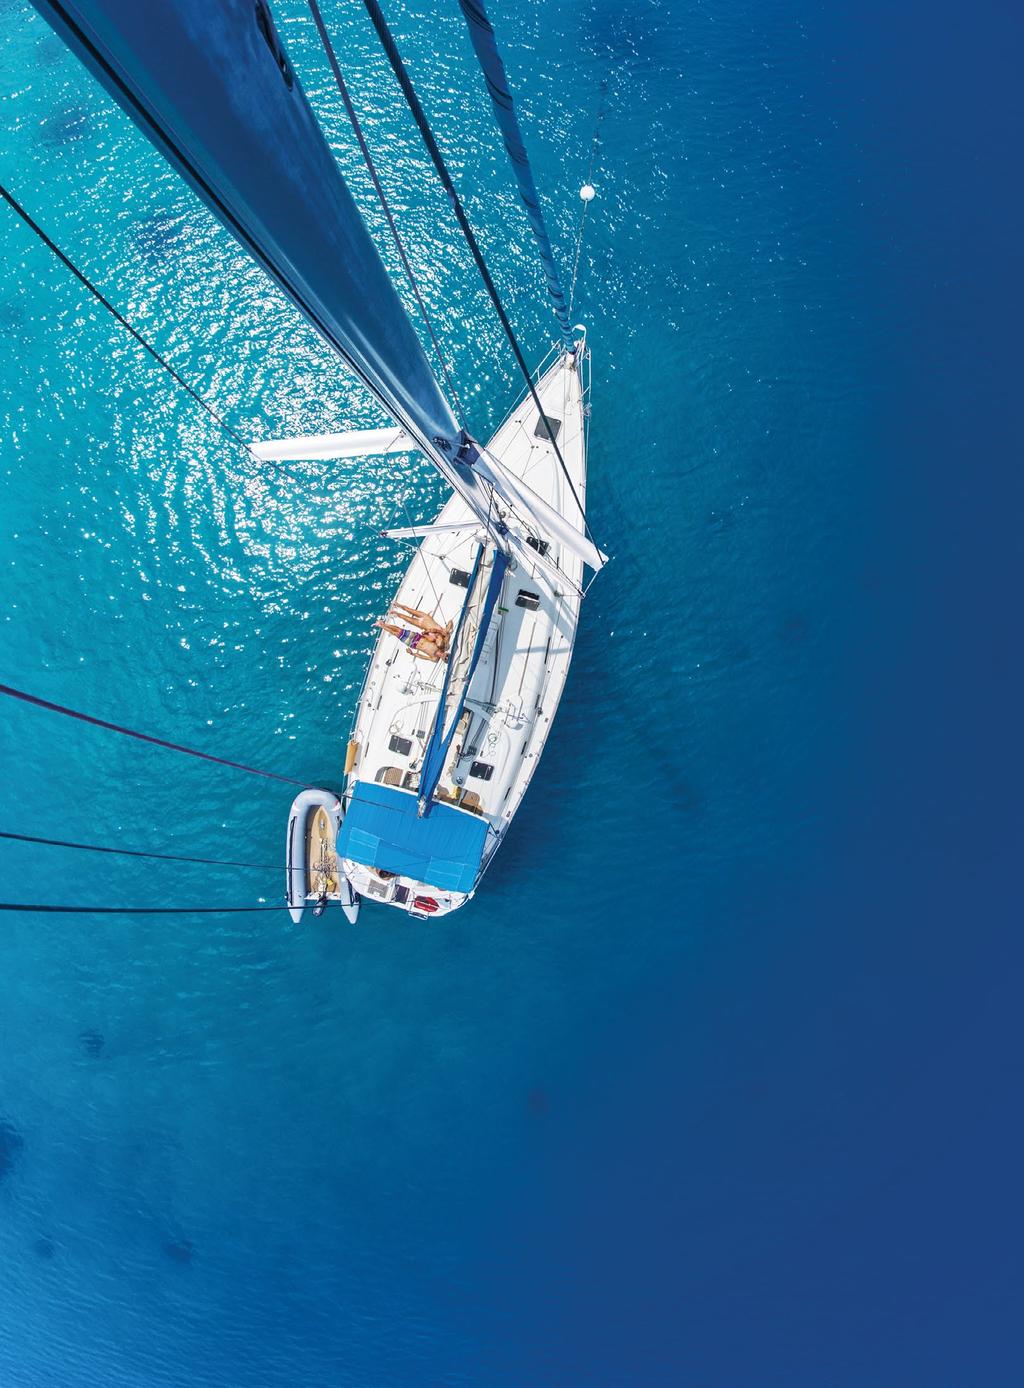 Greece the paradise of yachting 2,000 islands With much more than 2,000